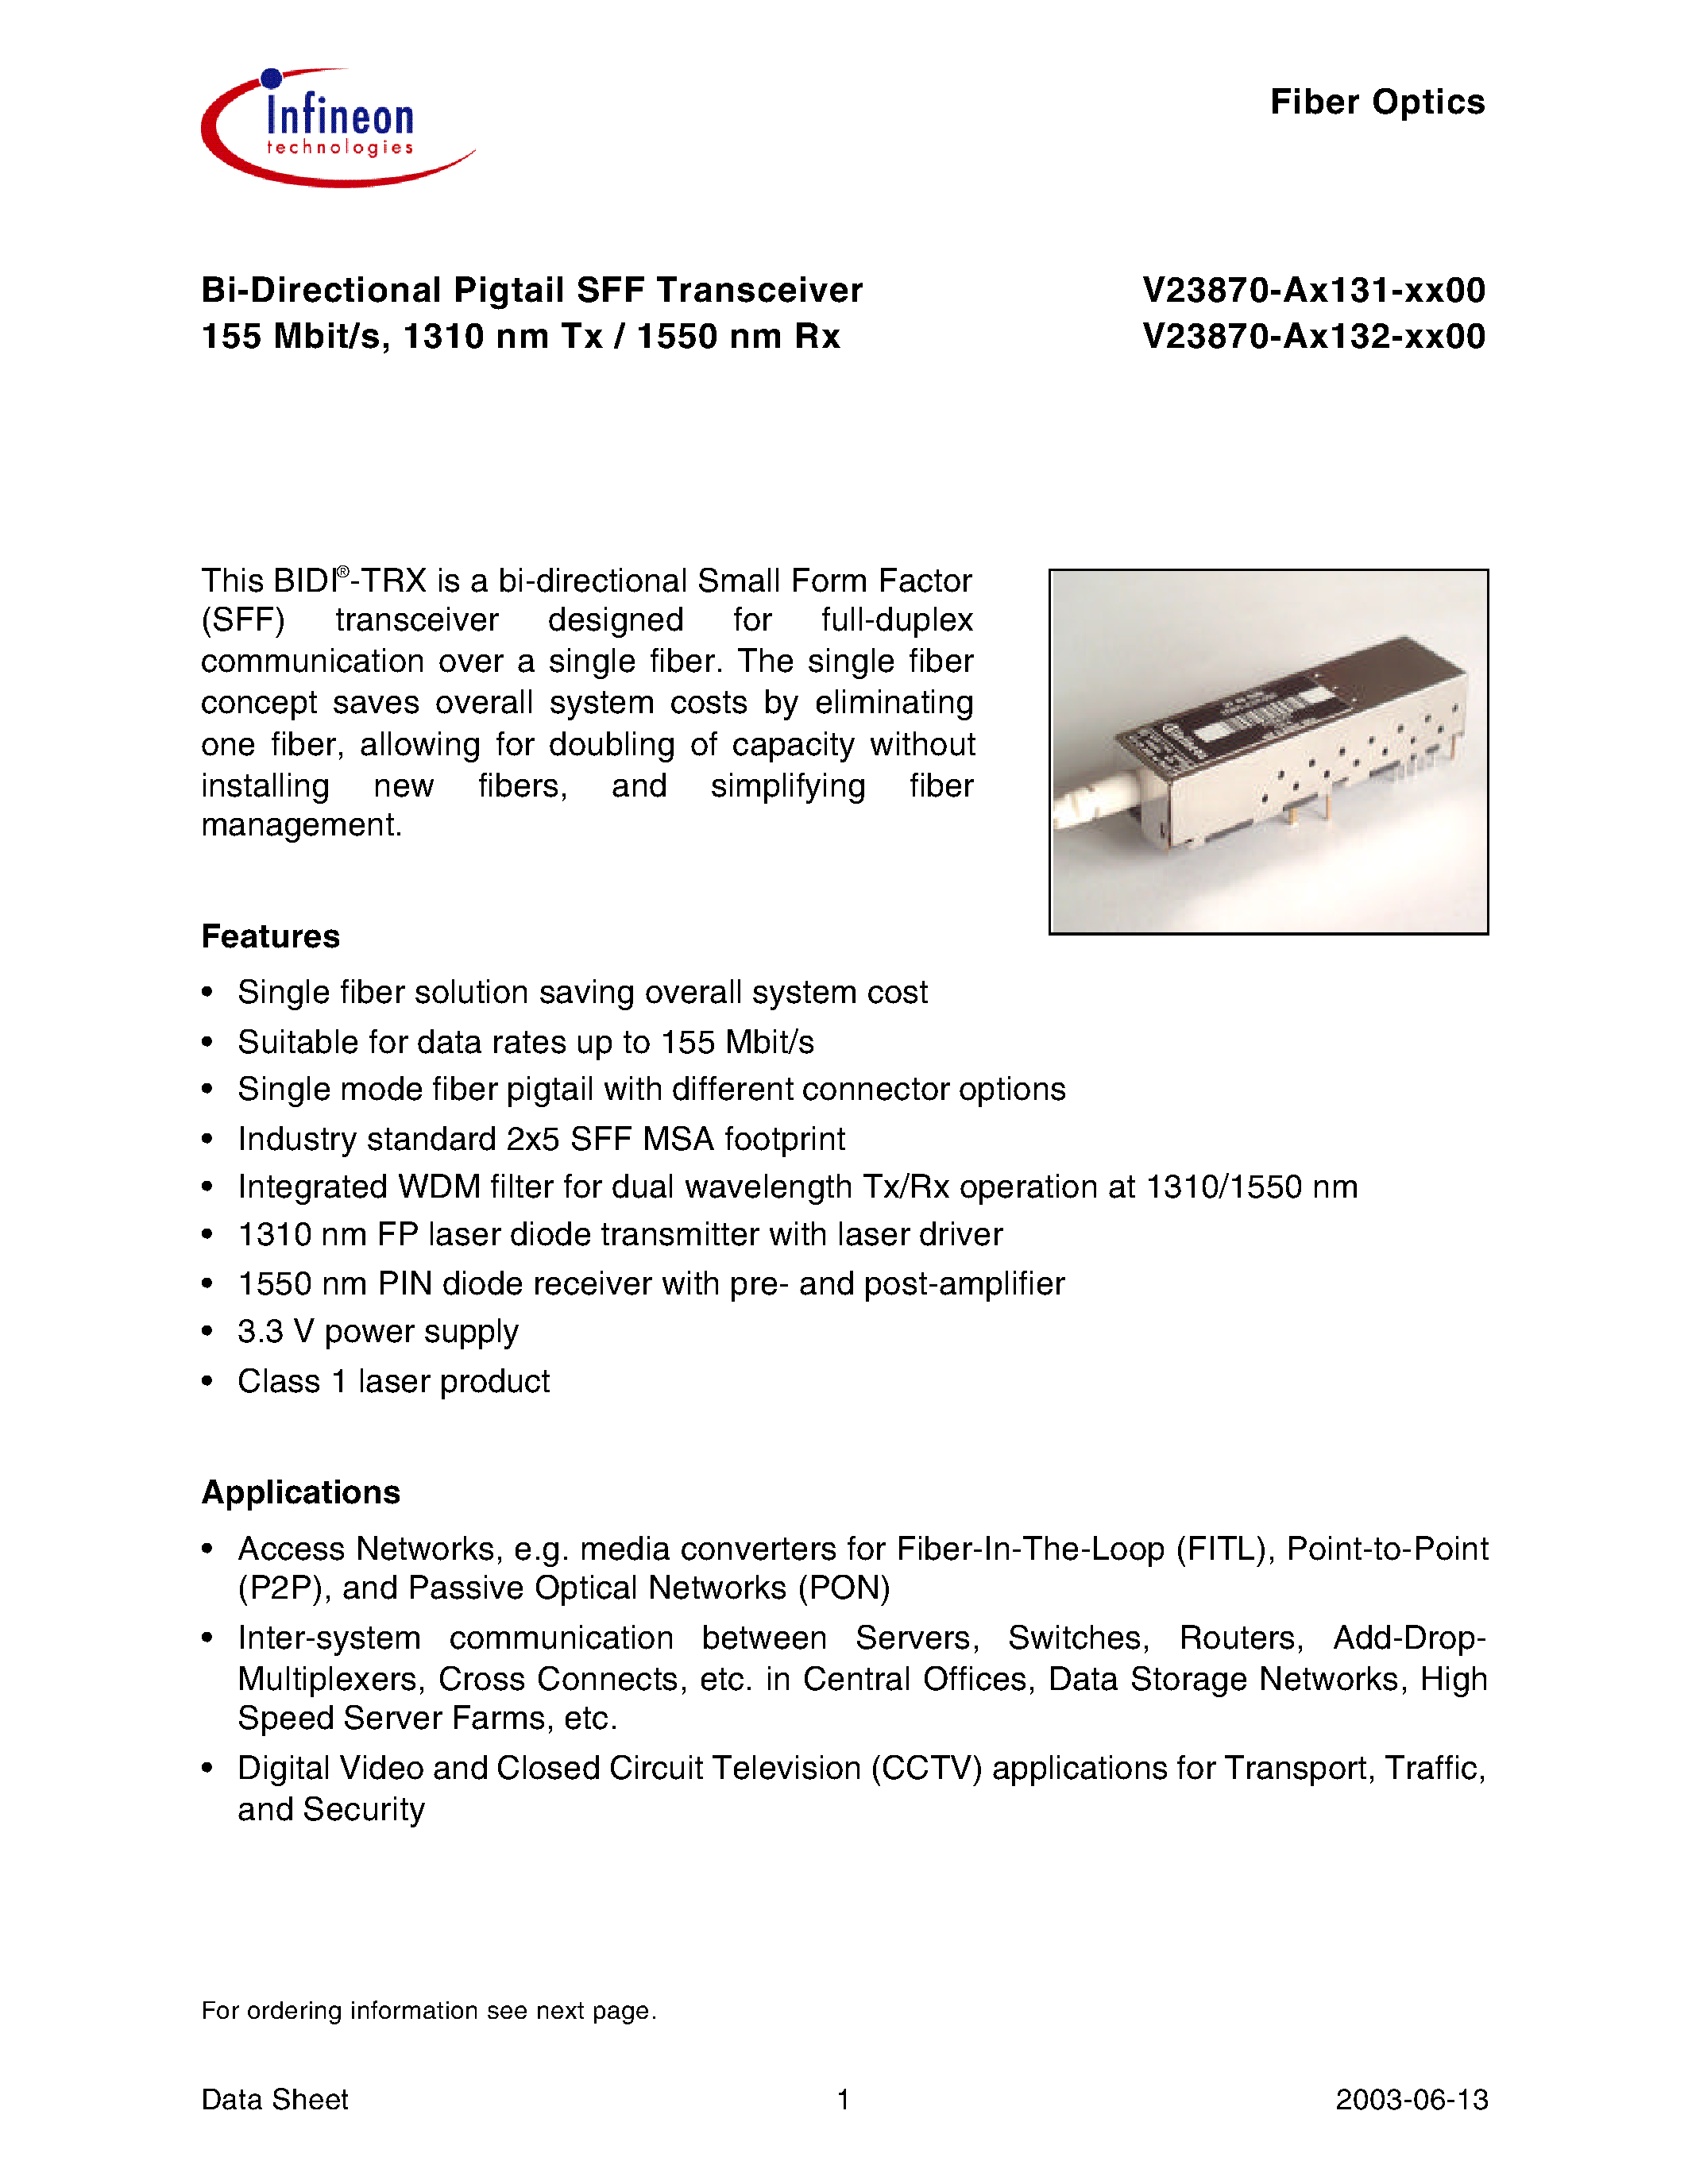 Datasheet V23870-A3132-H100 - Bi-Directional Pigtail SFF Transceiver 155 Mbit/s/ 1310 nm Tx / 1550 nm Rx page 1